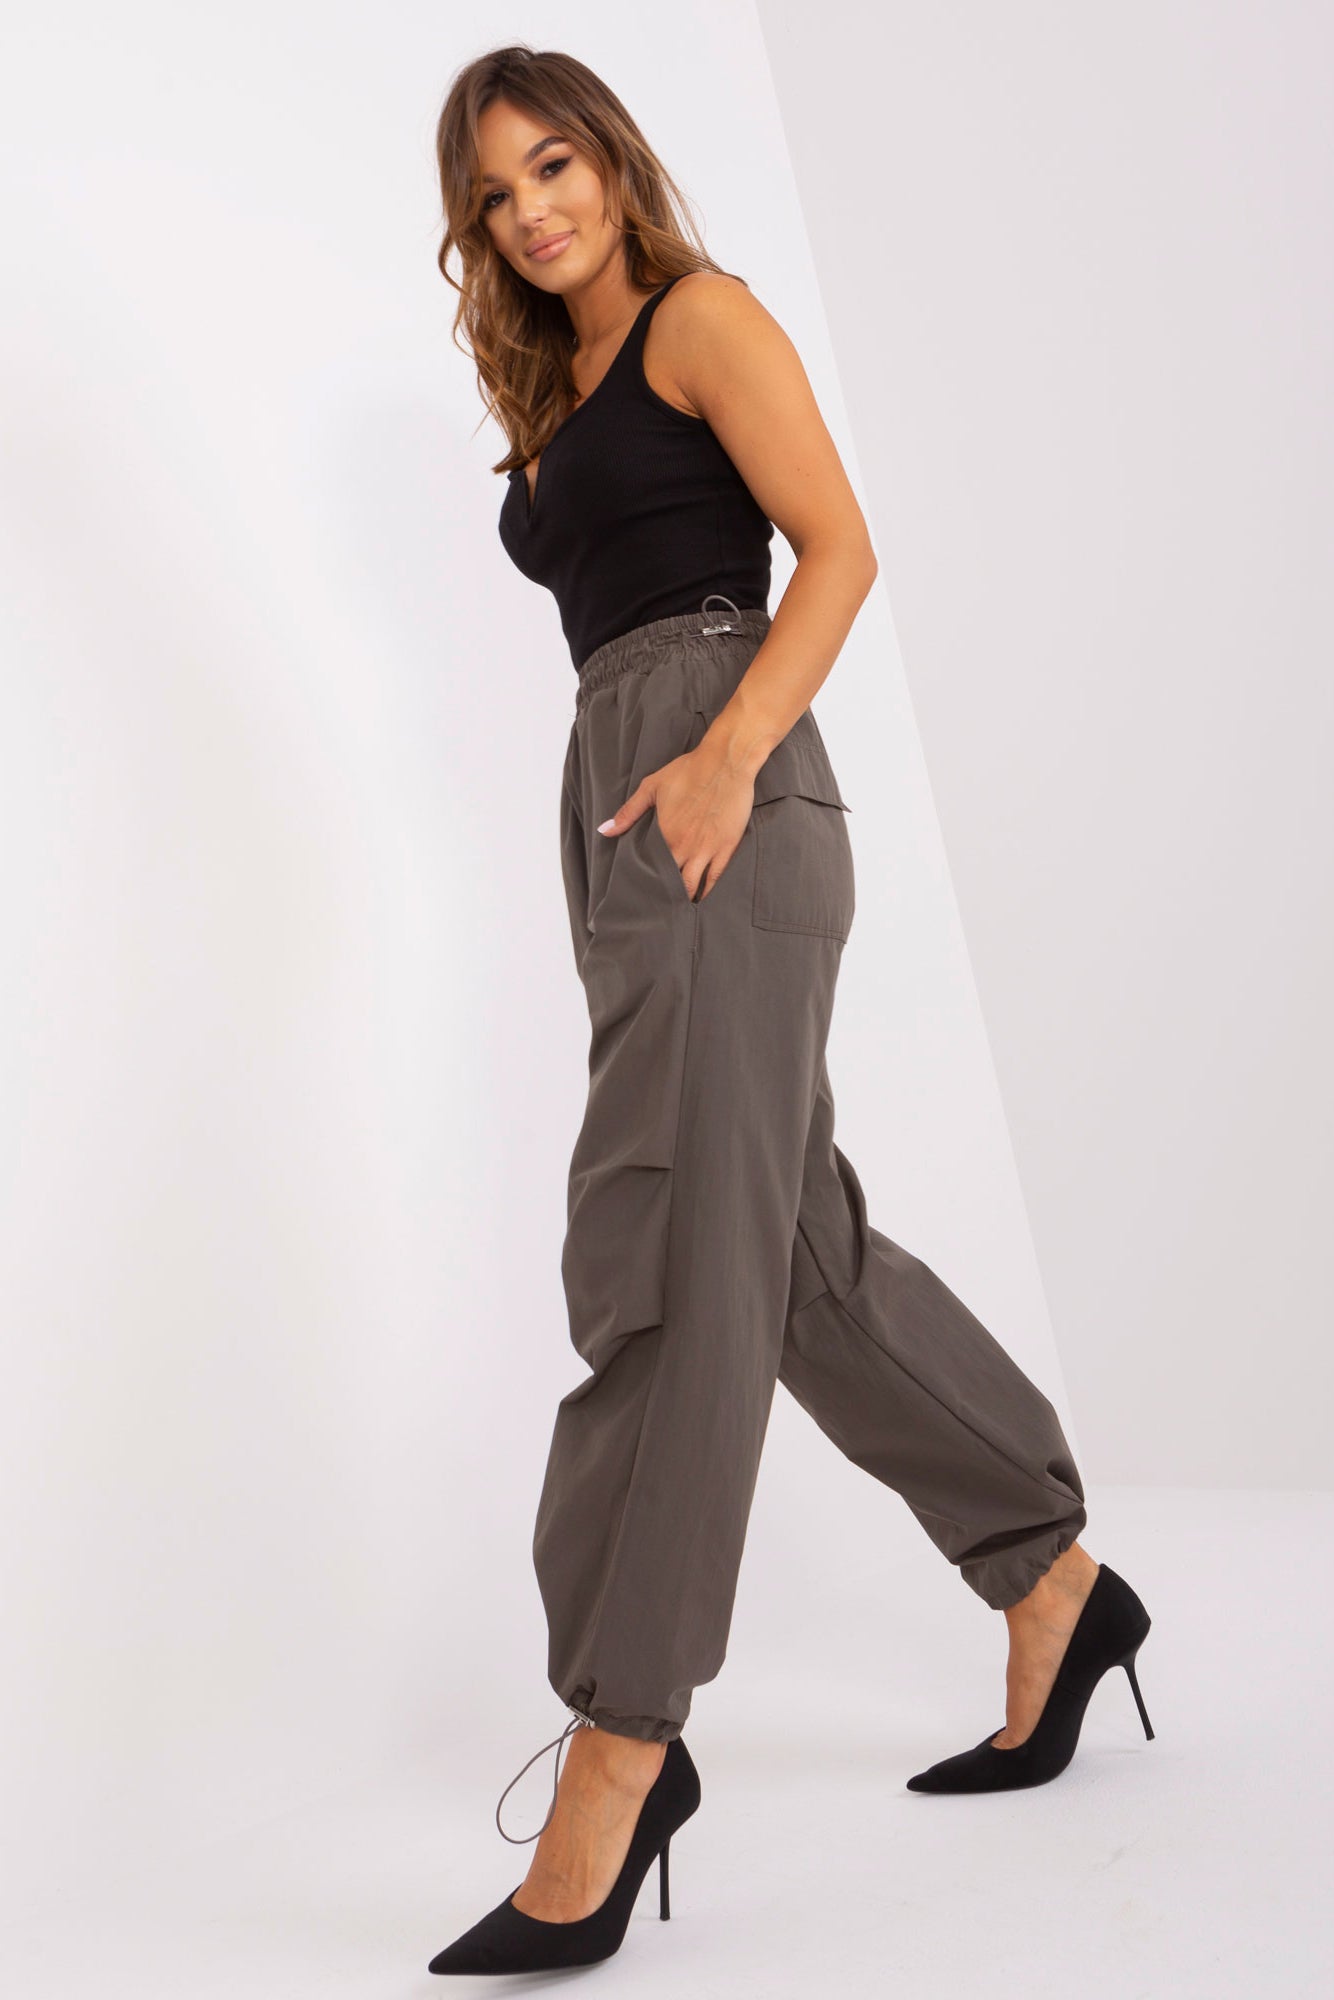 Stay in vogue with our trendy Women's Parachute Trousers. These trousers effortlessly embody the latest fashion trends, delivering both style and comfort. Designed for the modern woman, they offer a versatile and chic option for any occasion. Explore your fashion possibilities today.